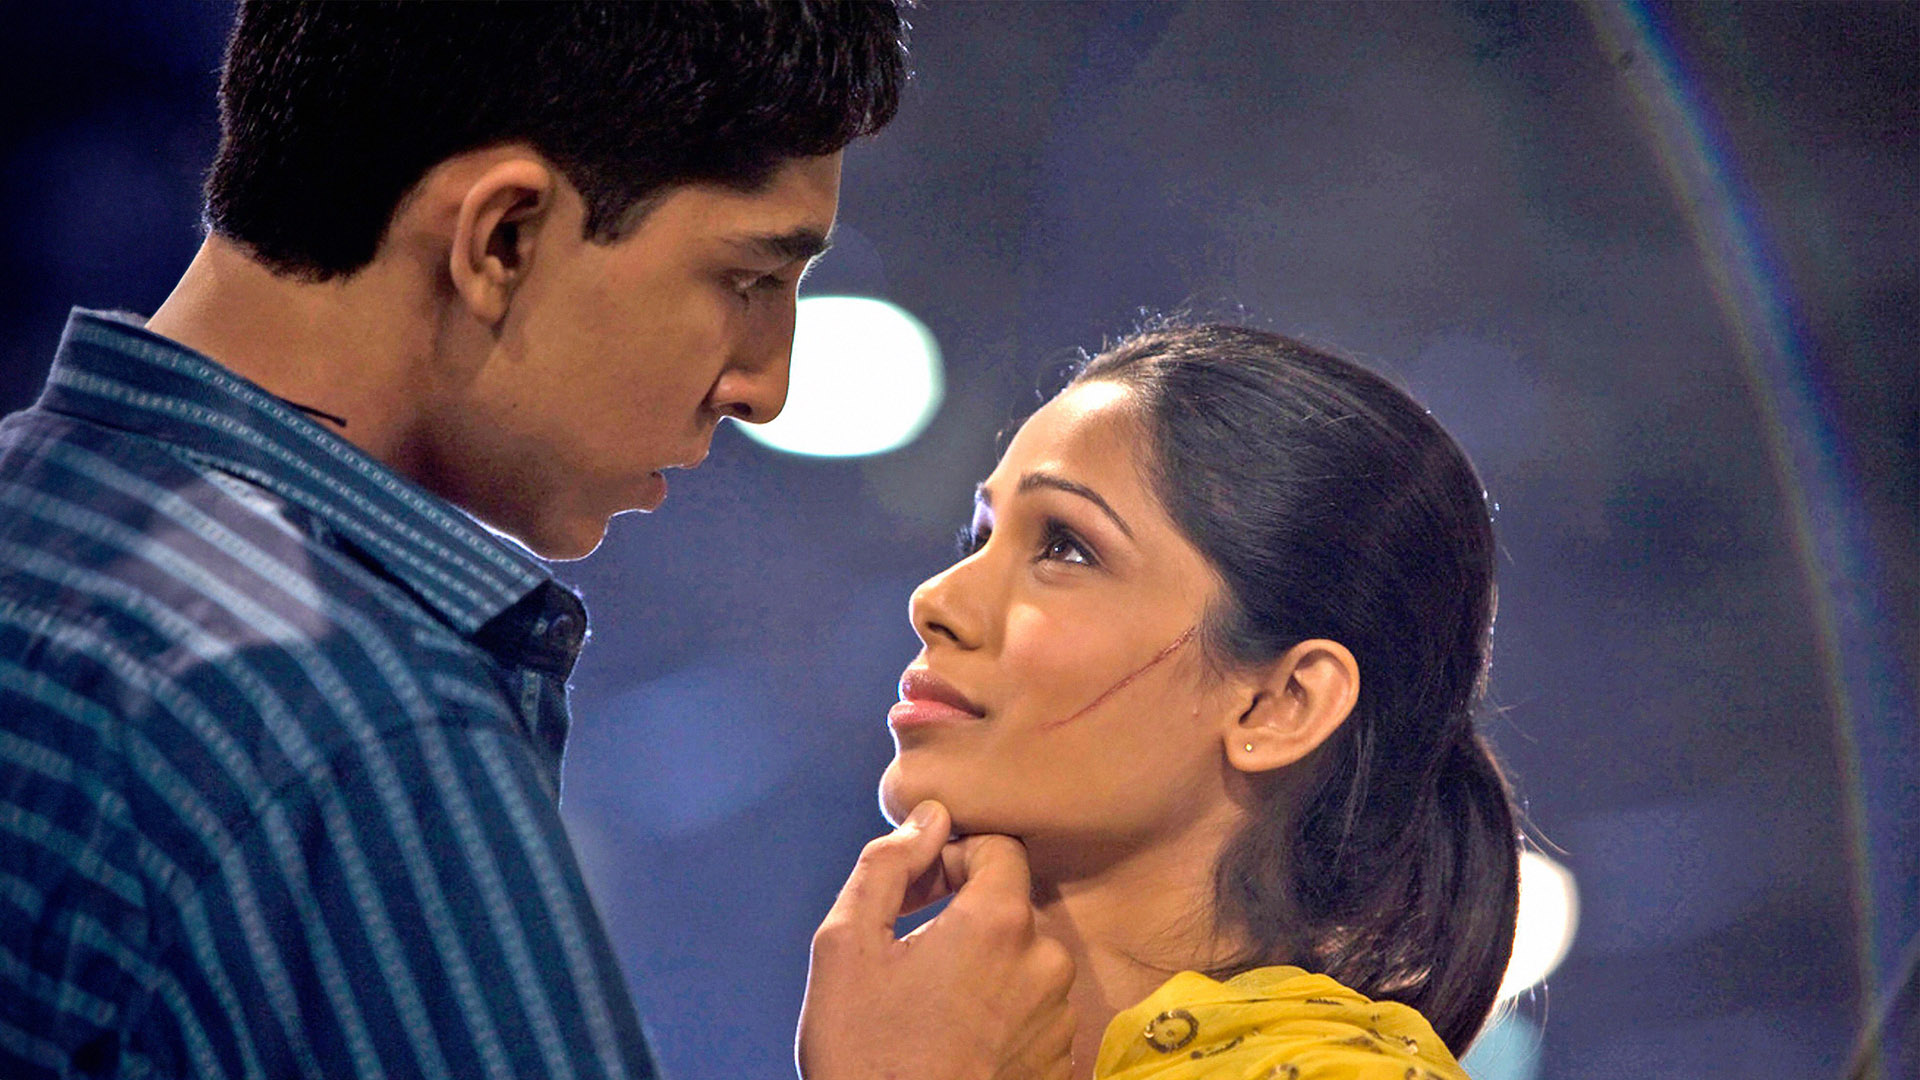 Are Freida Pinto and Dev Patel Still Friends After a Breakup?